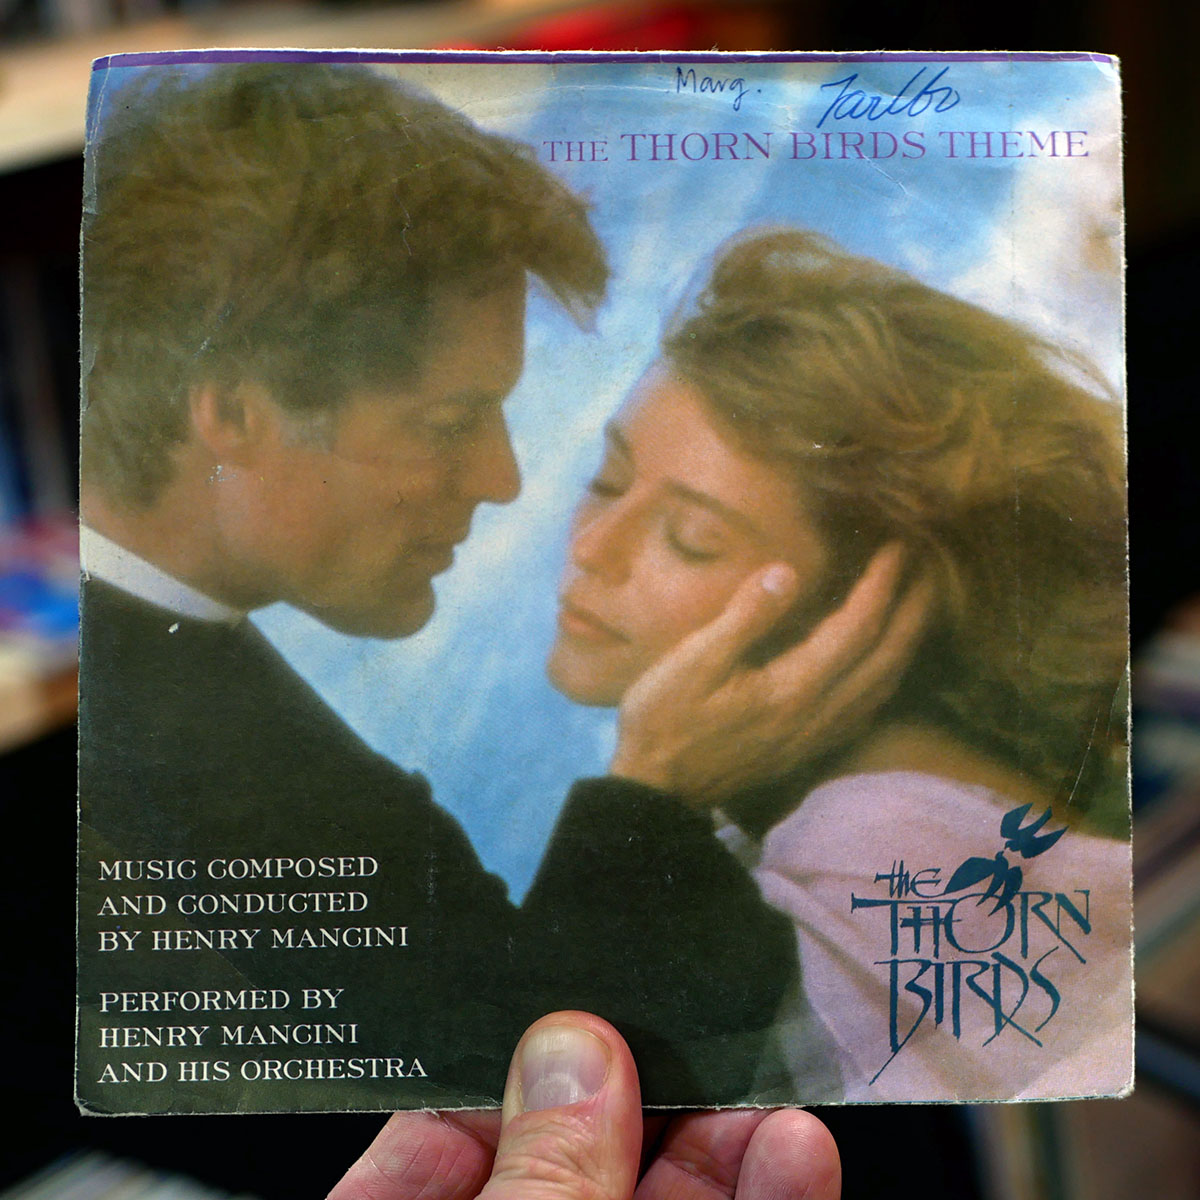 Henry Mancini and his Orchestra – The Thorn Birds Theme [7", 1983]